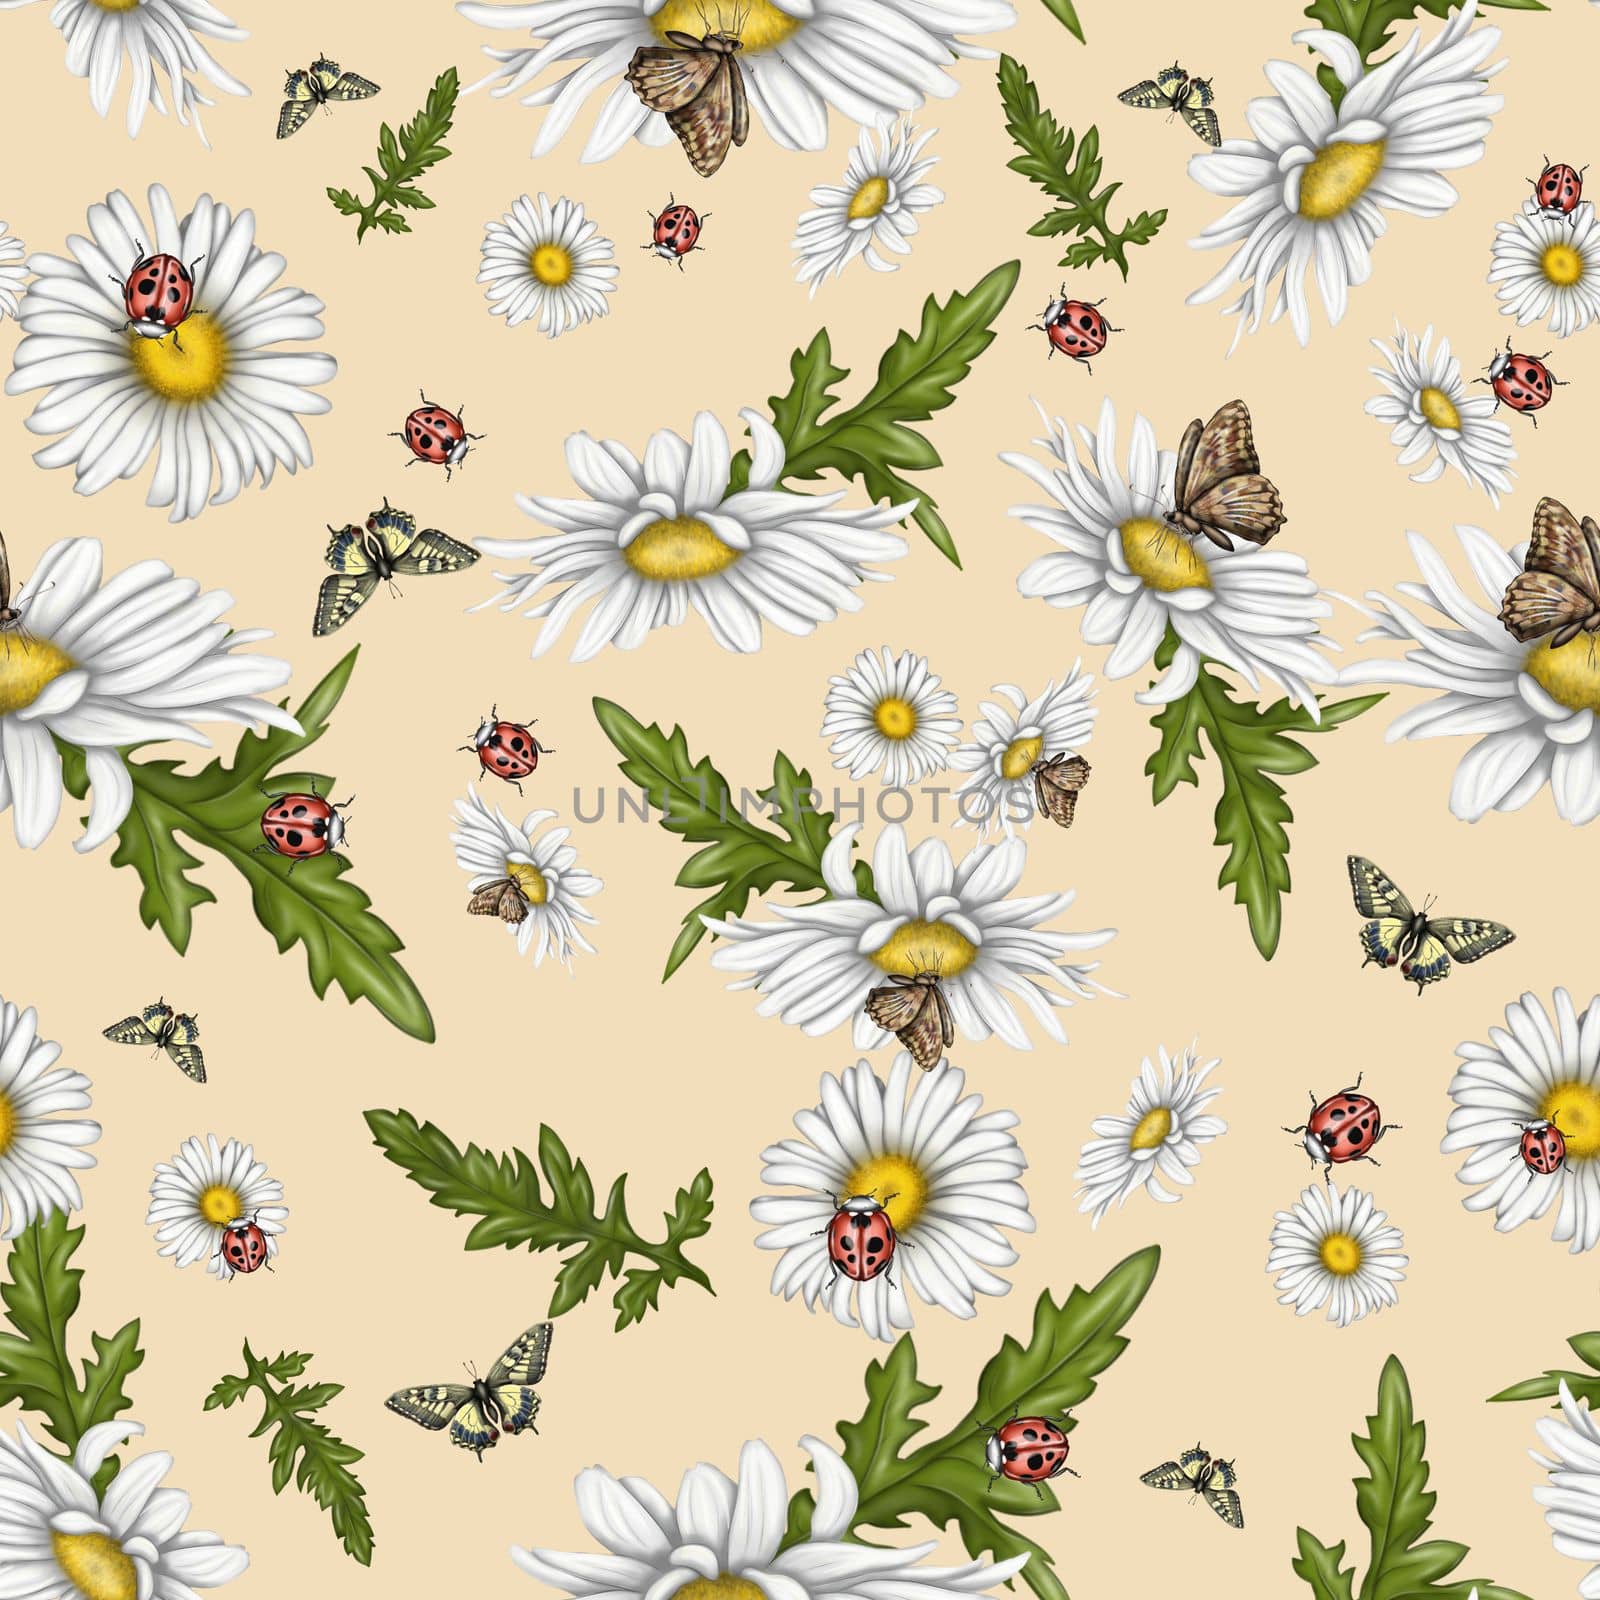 Seamless pattern for printing. Illustration of chamomile flowers. Bright beautiful flowers on a light background. by Alina_Lebed